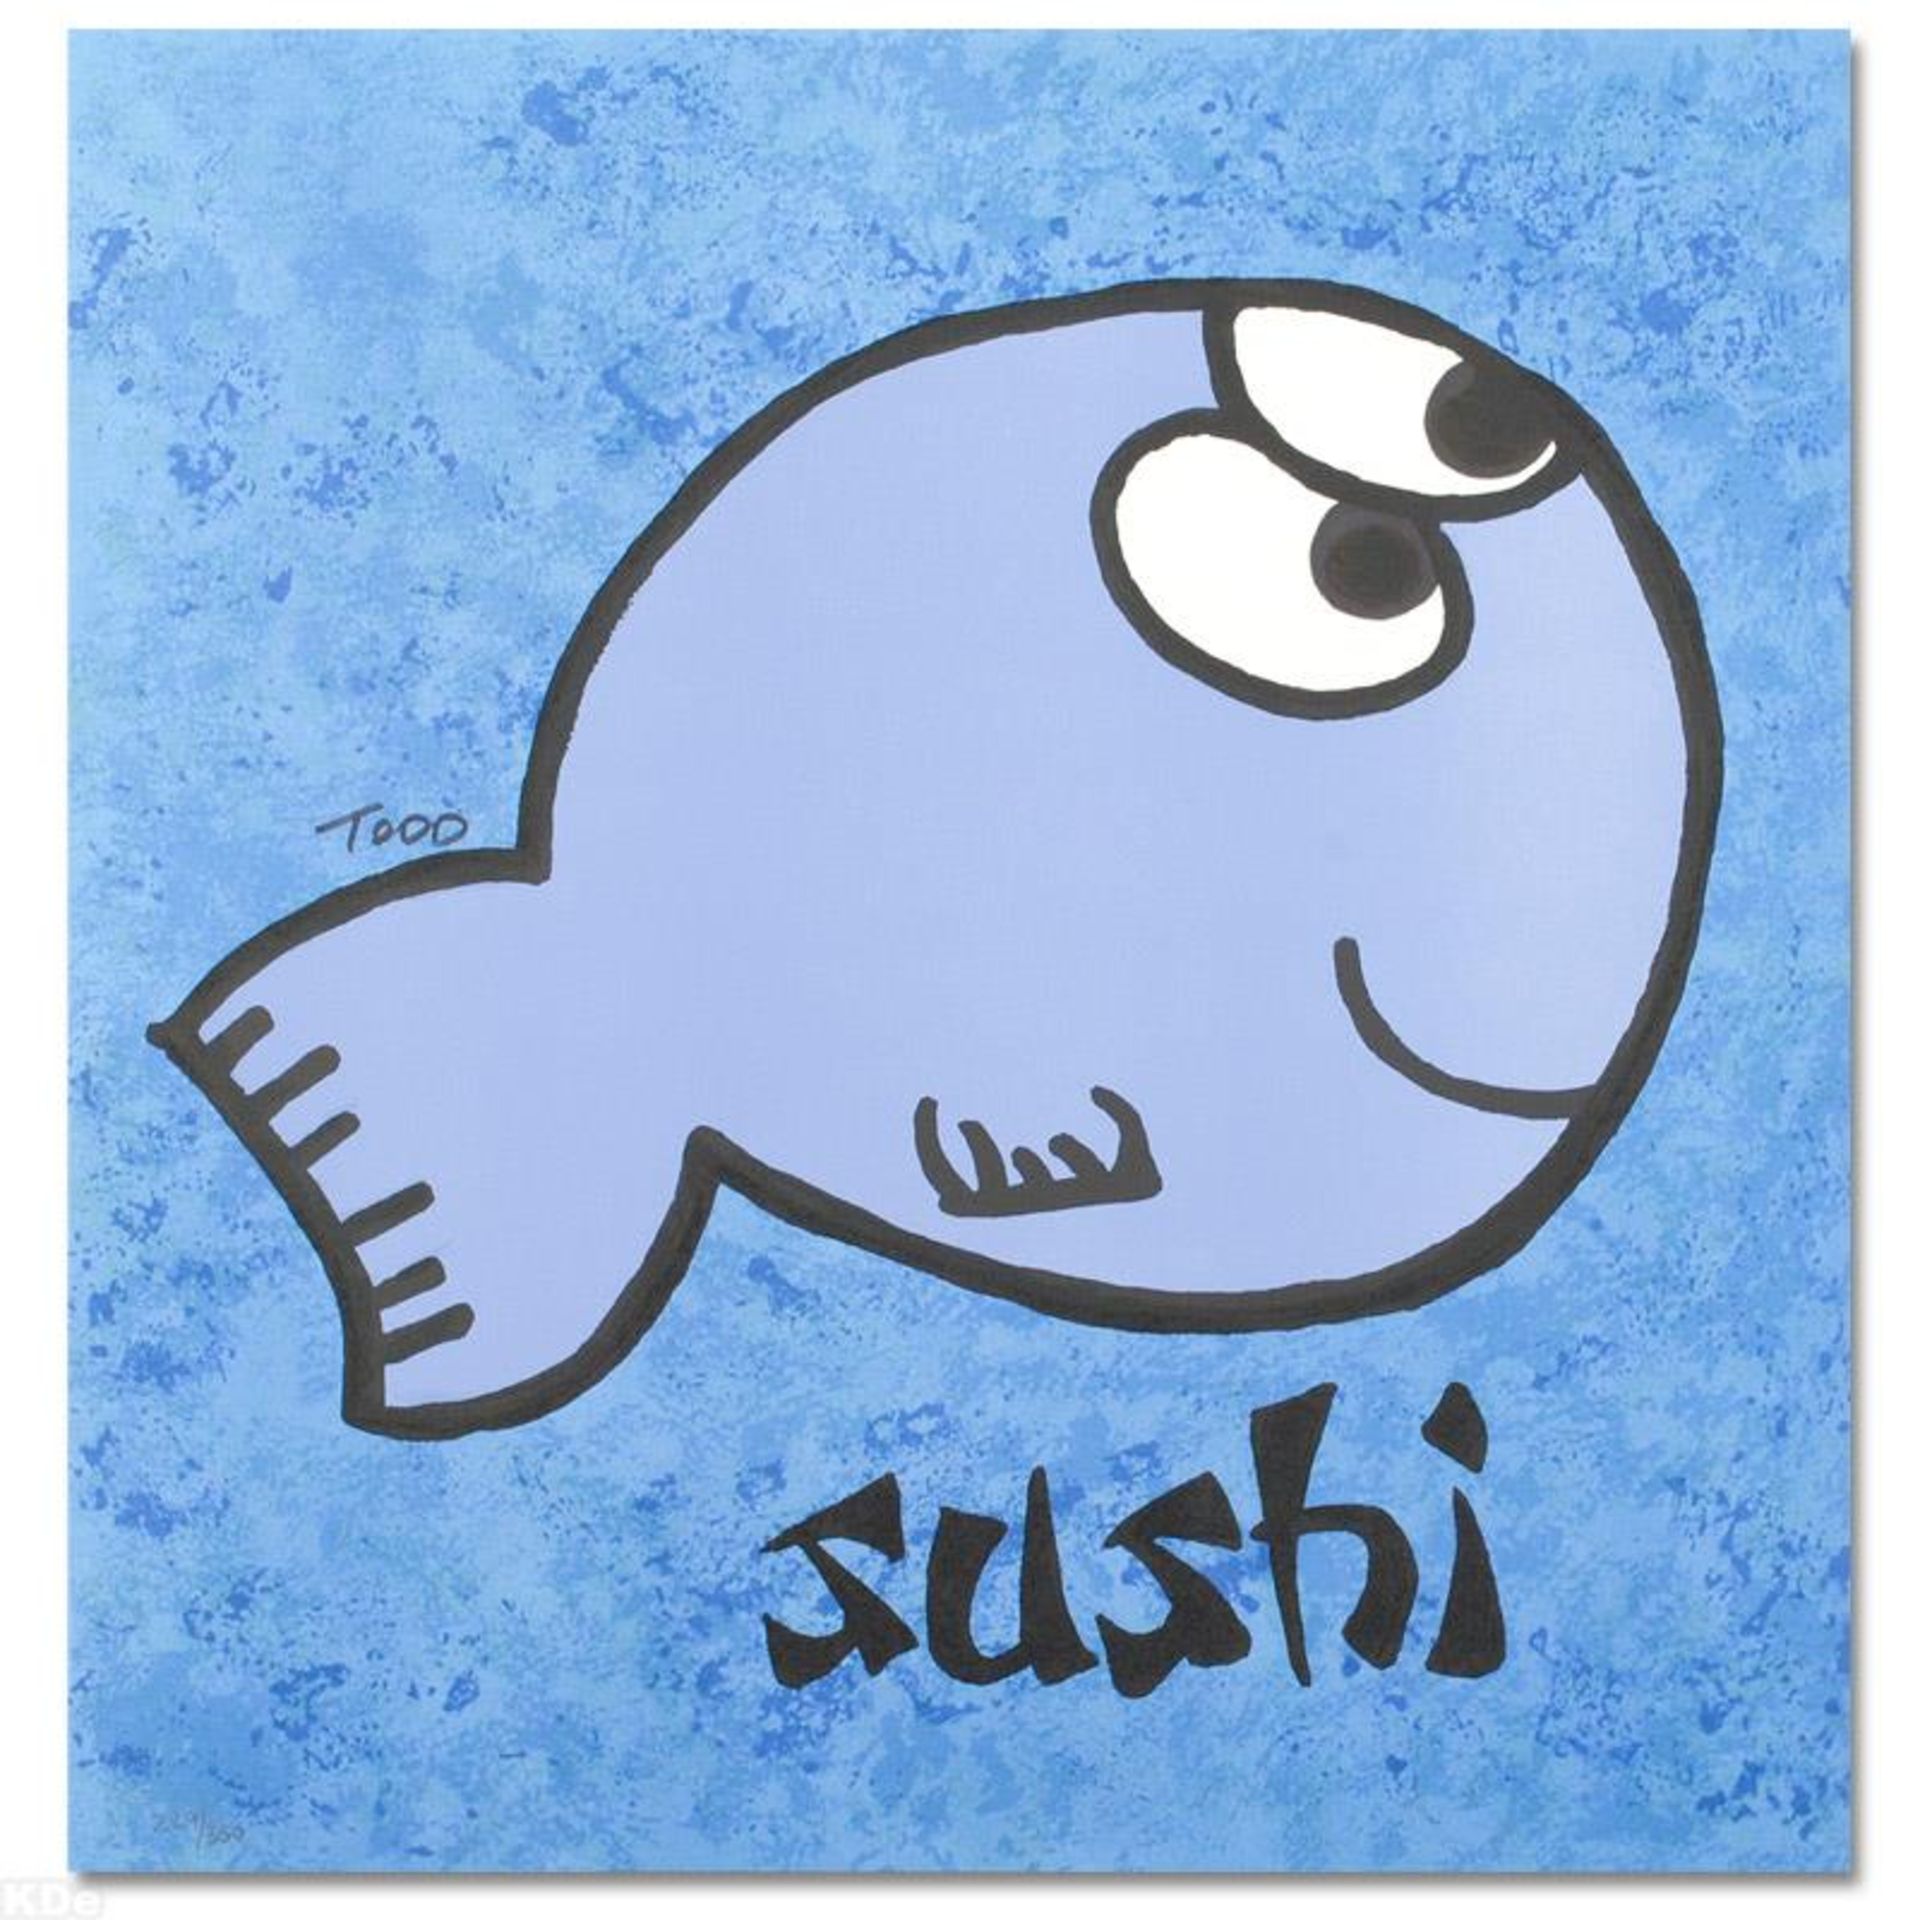 "Sushi" Limited Edition Lithograph by Todd Goldman, Numbered and Hand Signed wit